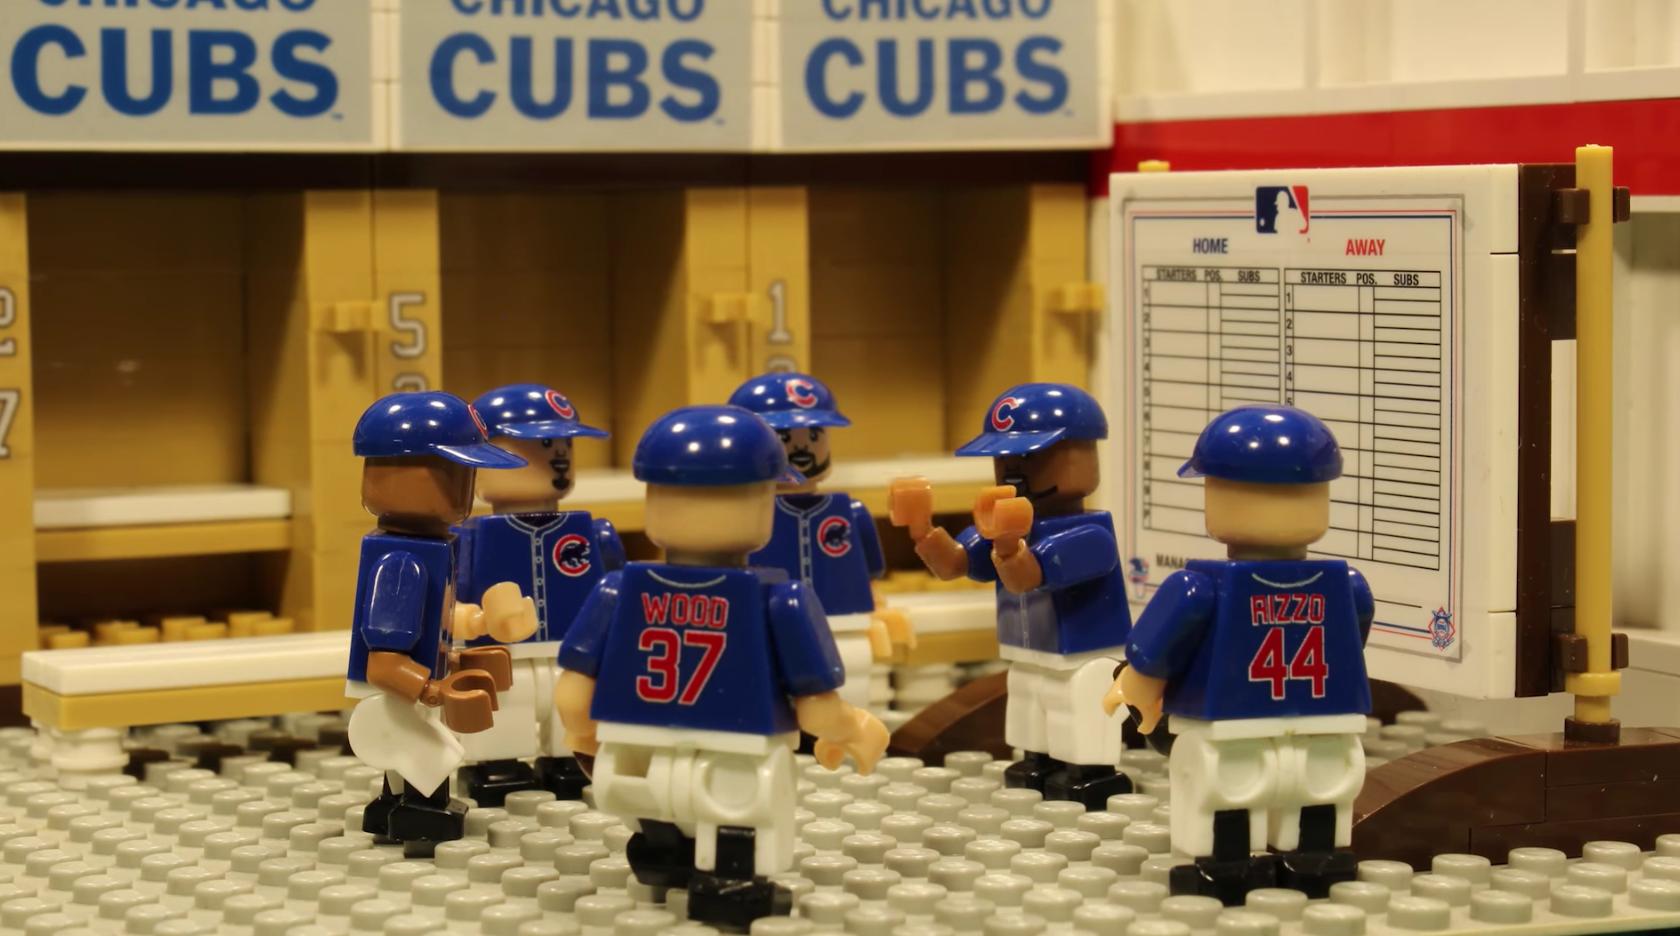 the-lego-version-of-game-7-of-the-2016-world-series-chicago-tribune